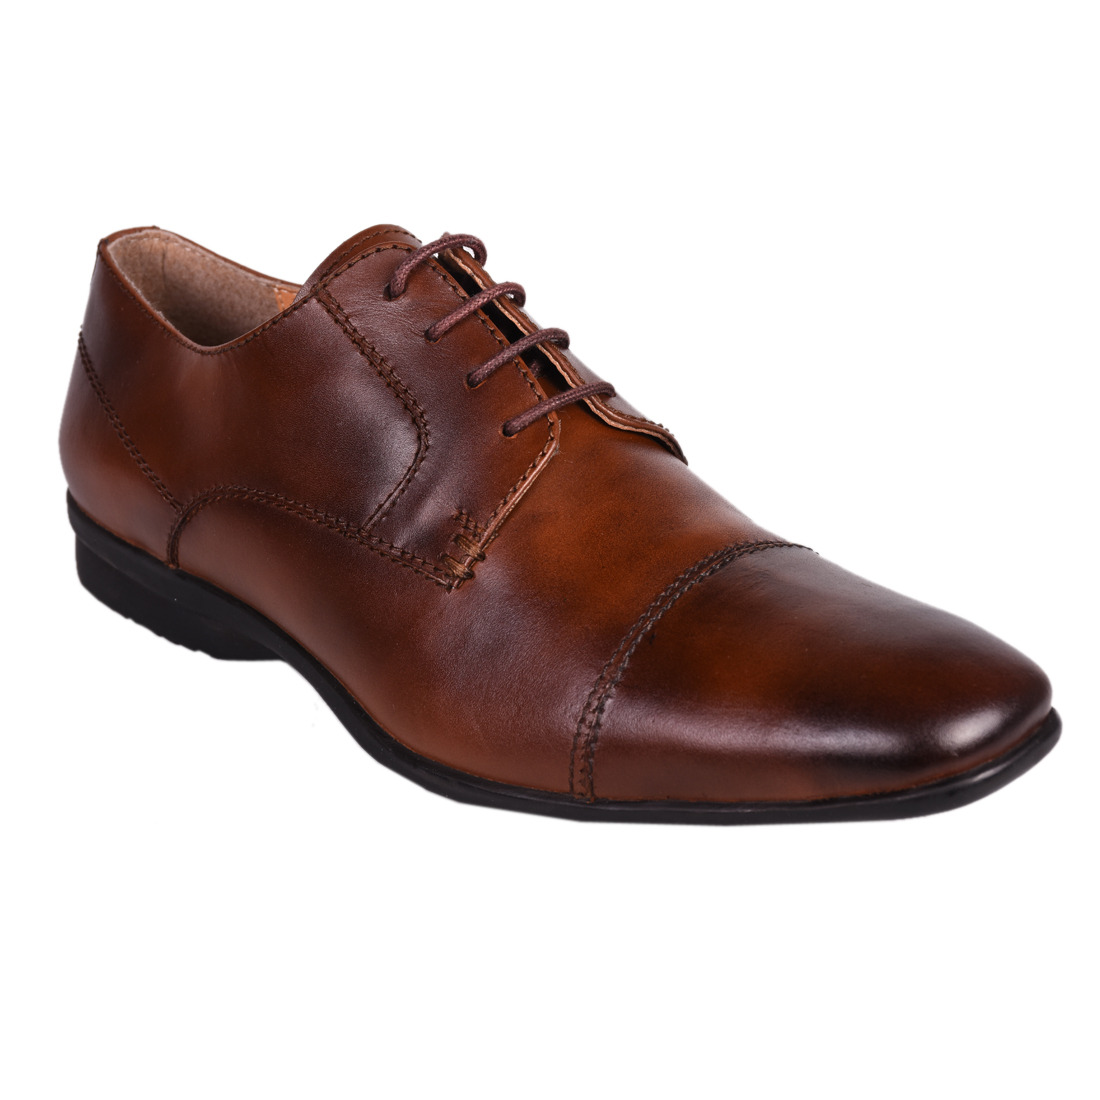 Buy Papa Leather Formal Shoes Online @ ₹1799 from ShopClues